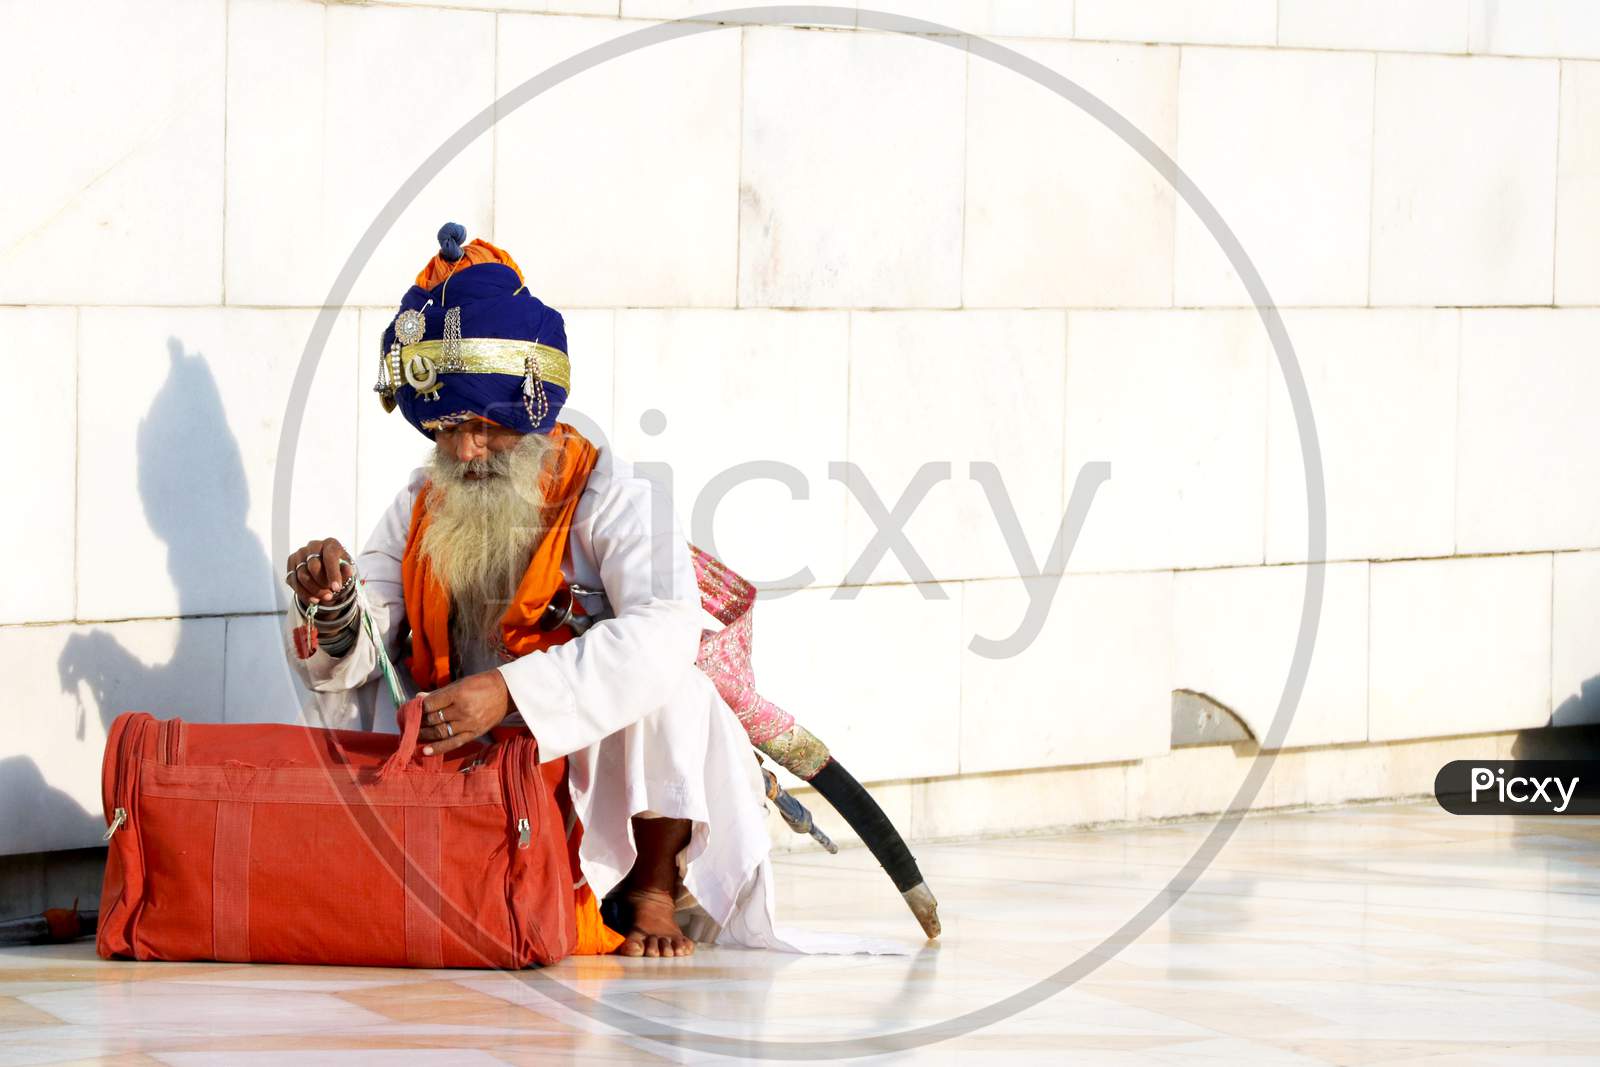 Amritsar, India - December 03, 2019: Unidentified Sikh Man Visiting The Golden Temple In Amritsar, Punjab, India. Sikh Pilgrims Travel From All Over India To Pray At This Holy Site.